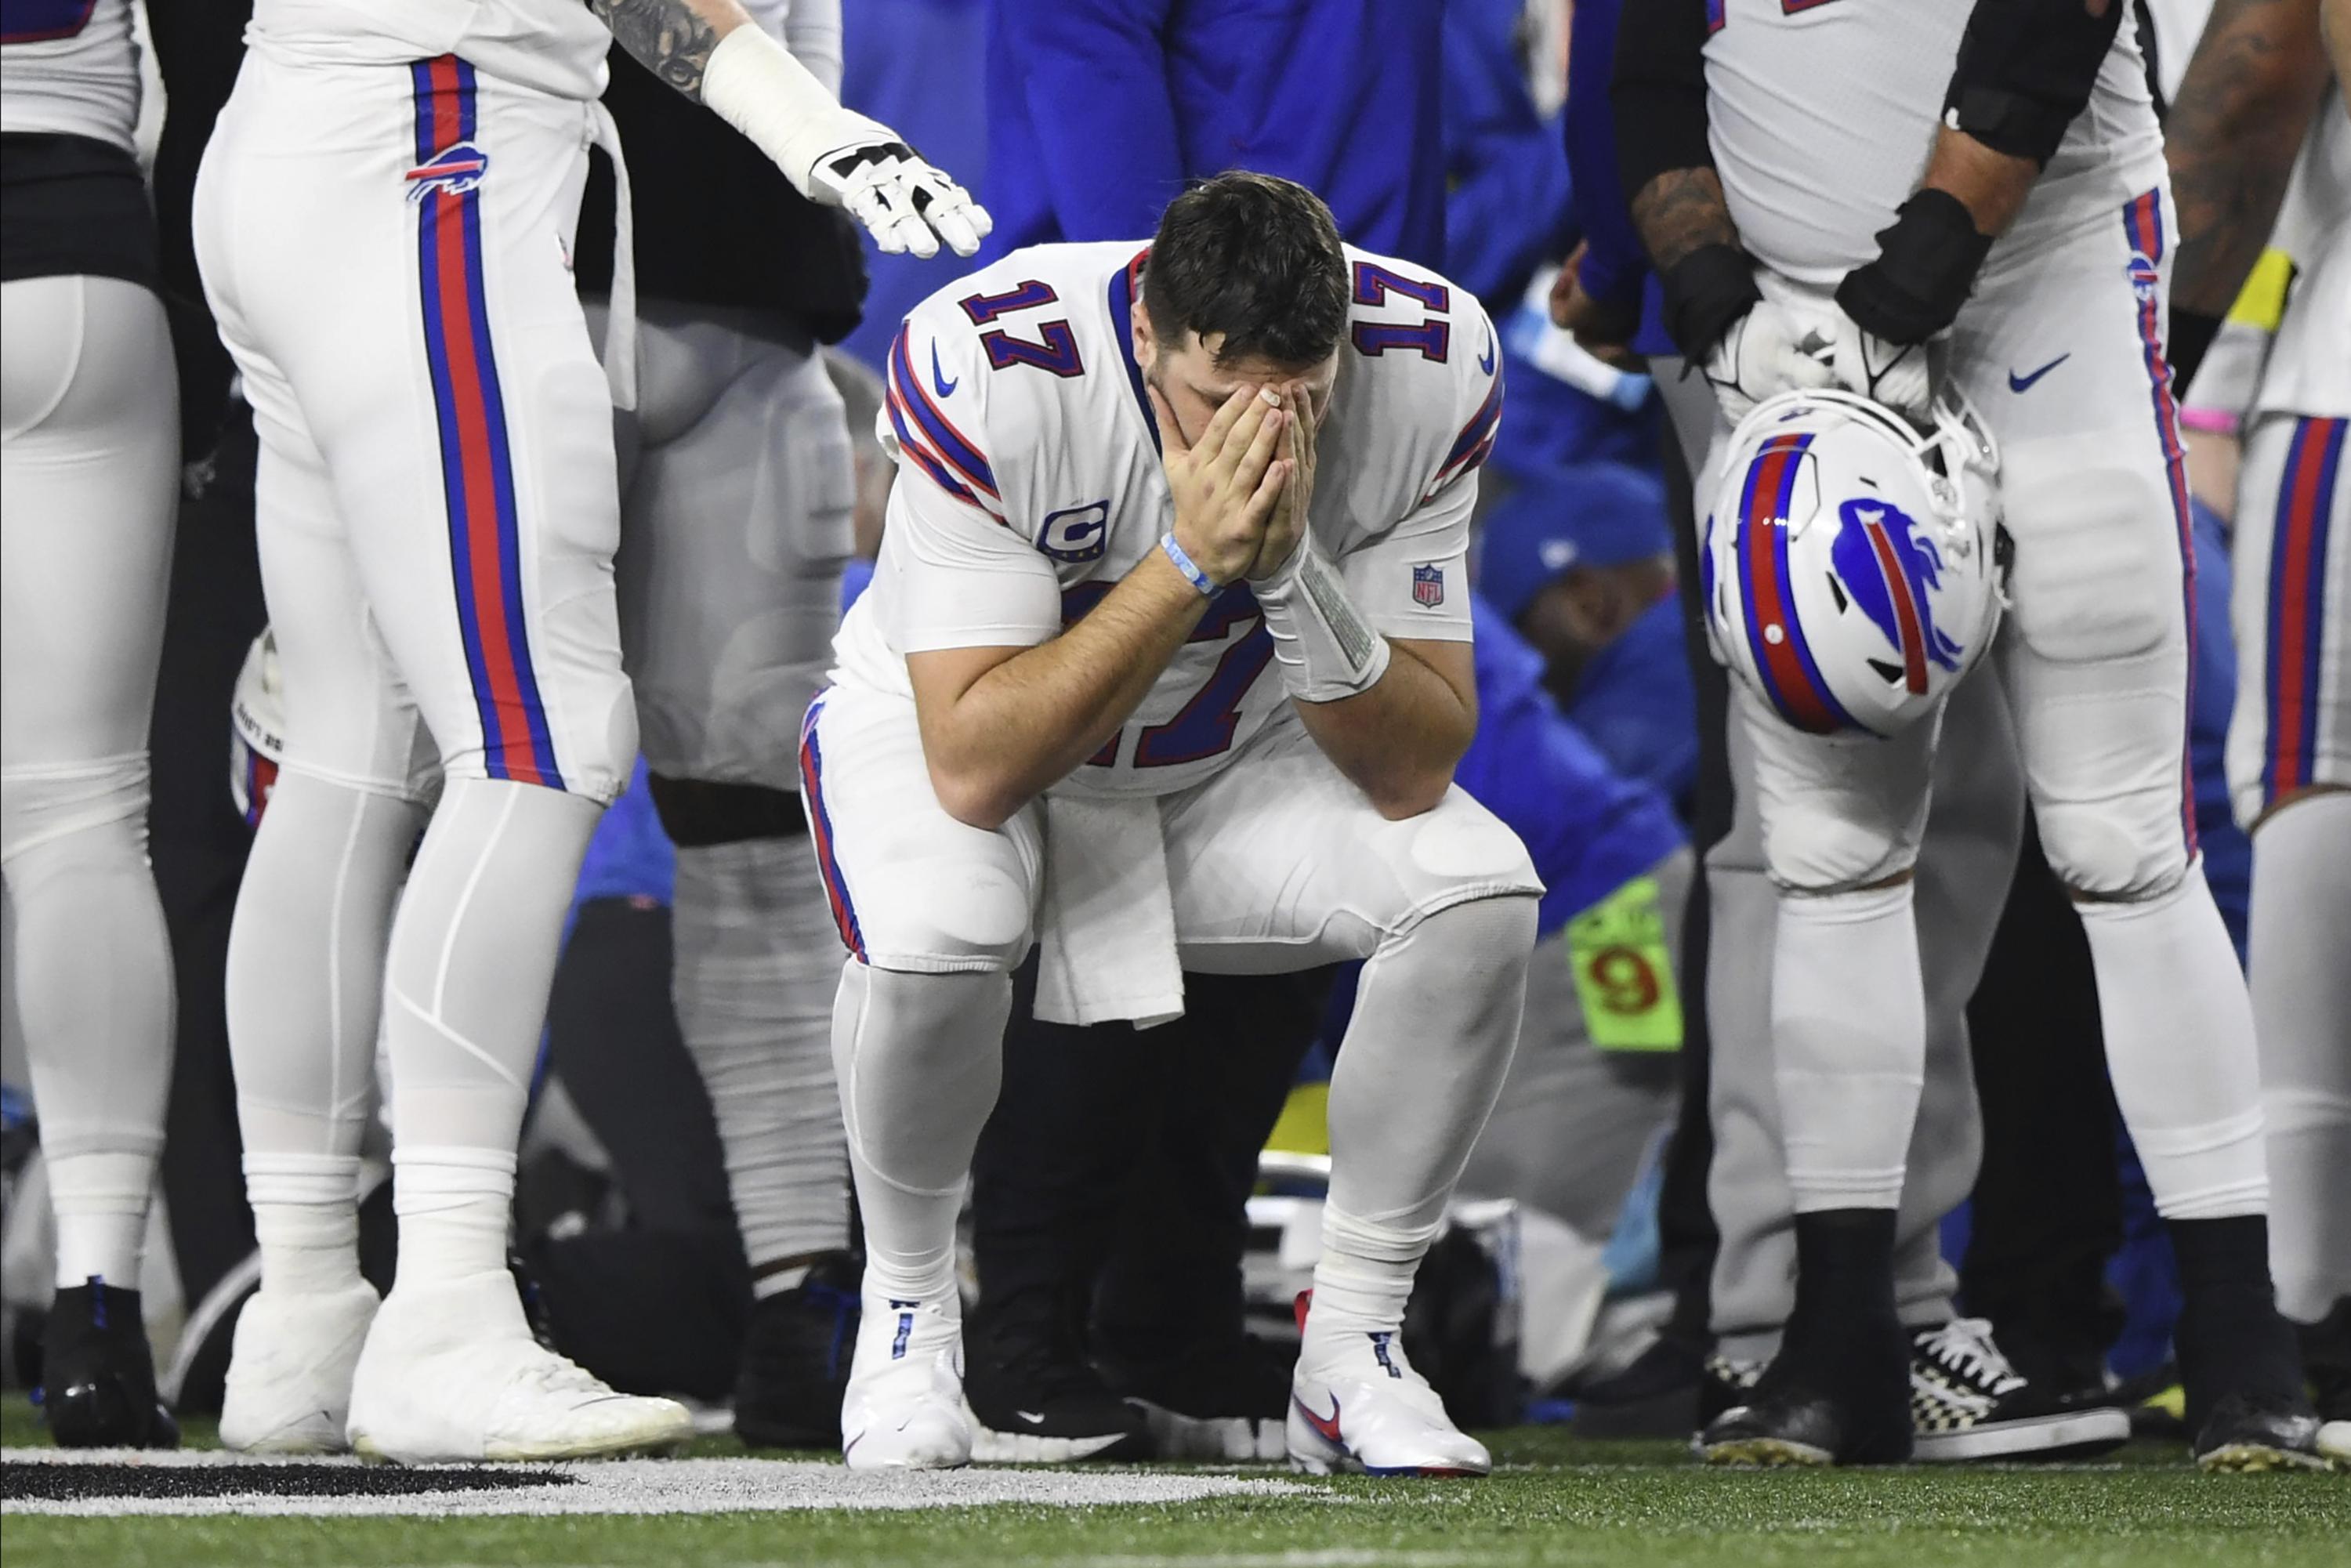 Bills' Hamlin in critical condition after collapse on field AP News